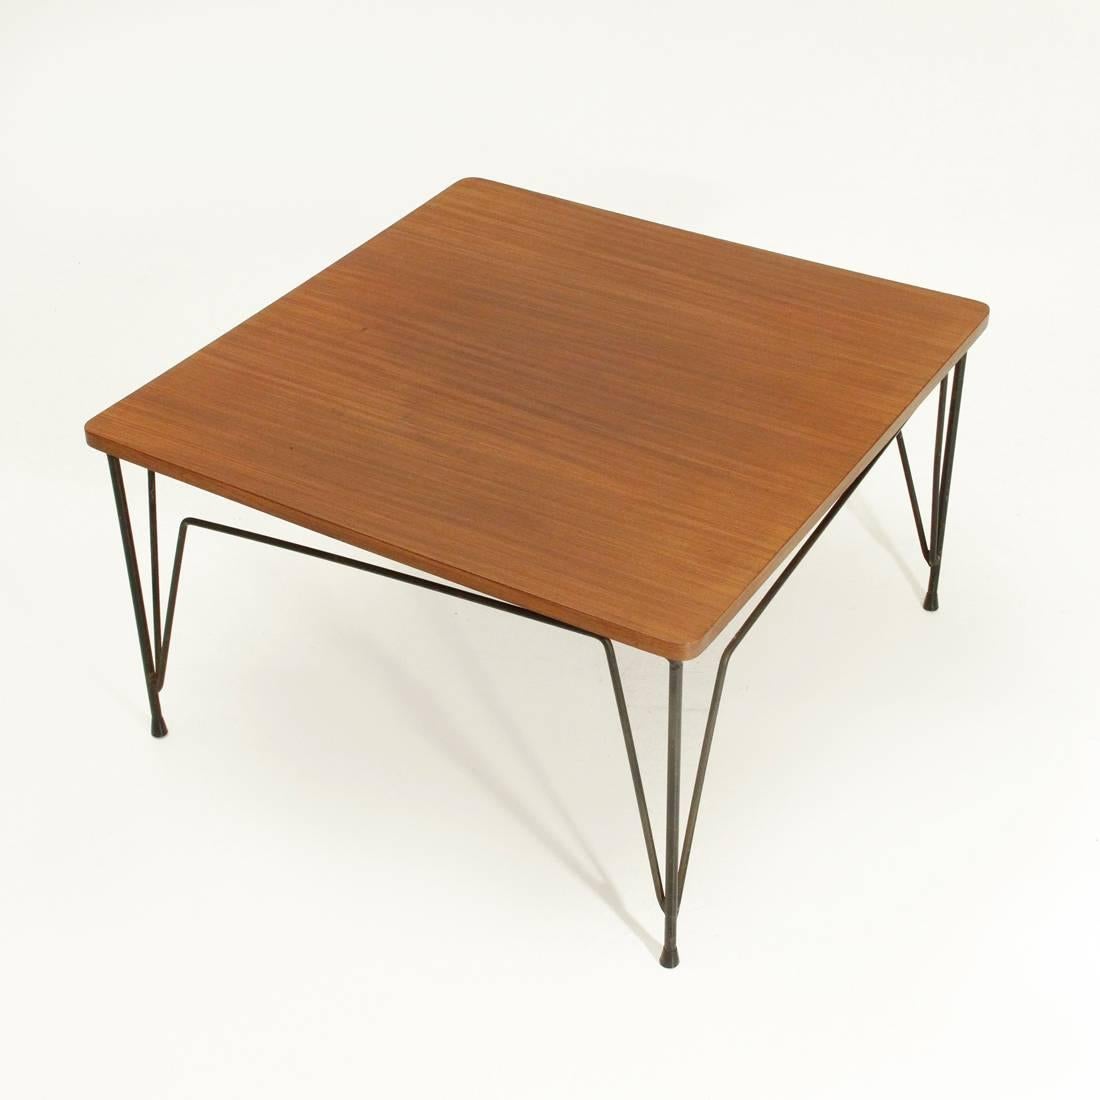 Mid-20th Century Square Teak Coffee Table by Cerutti, 1950s